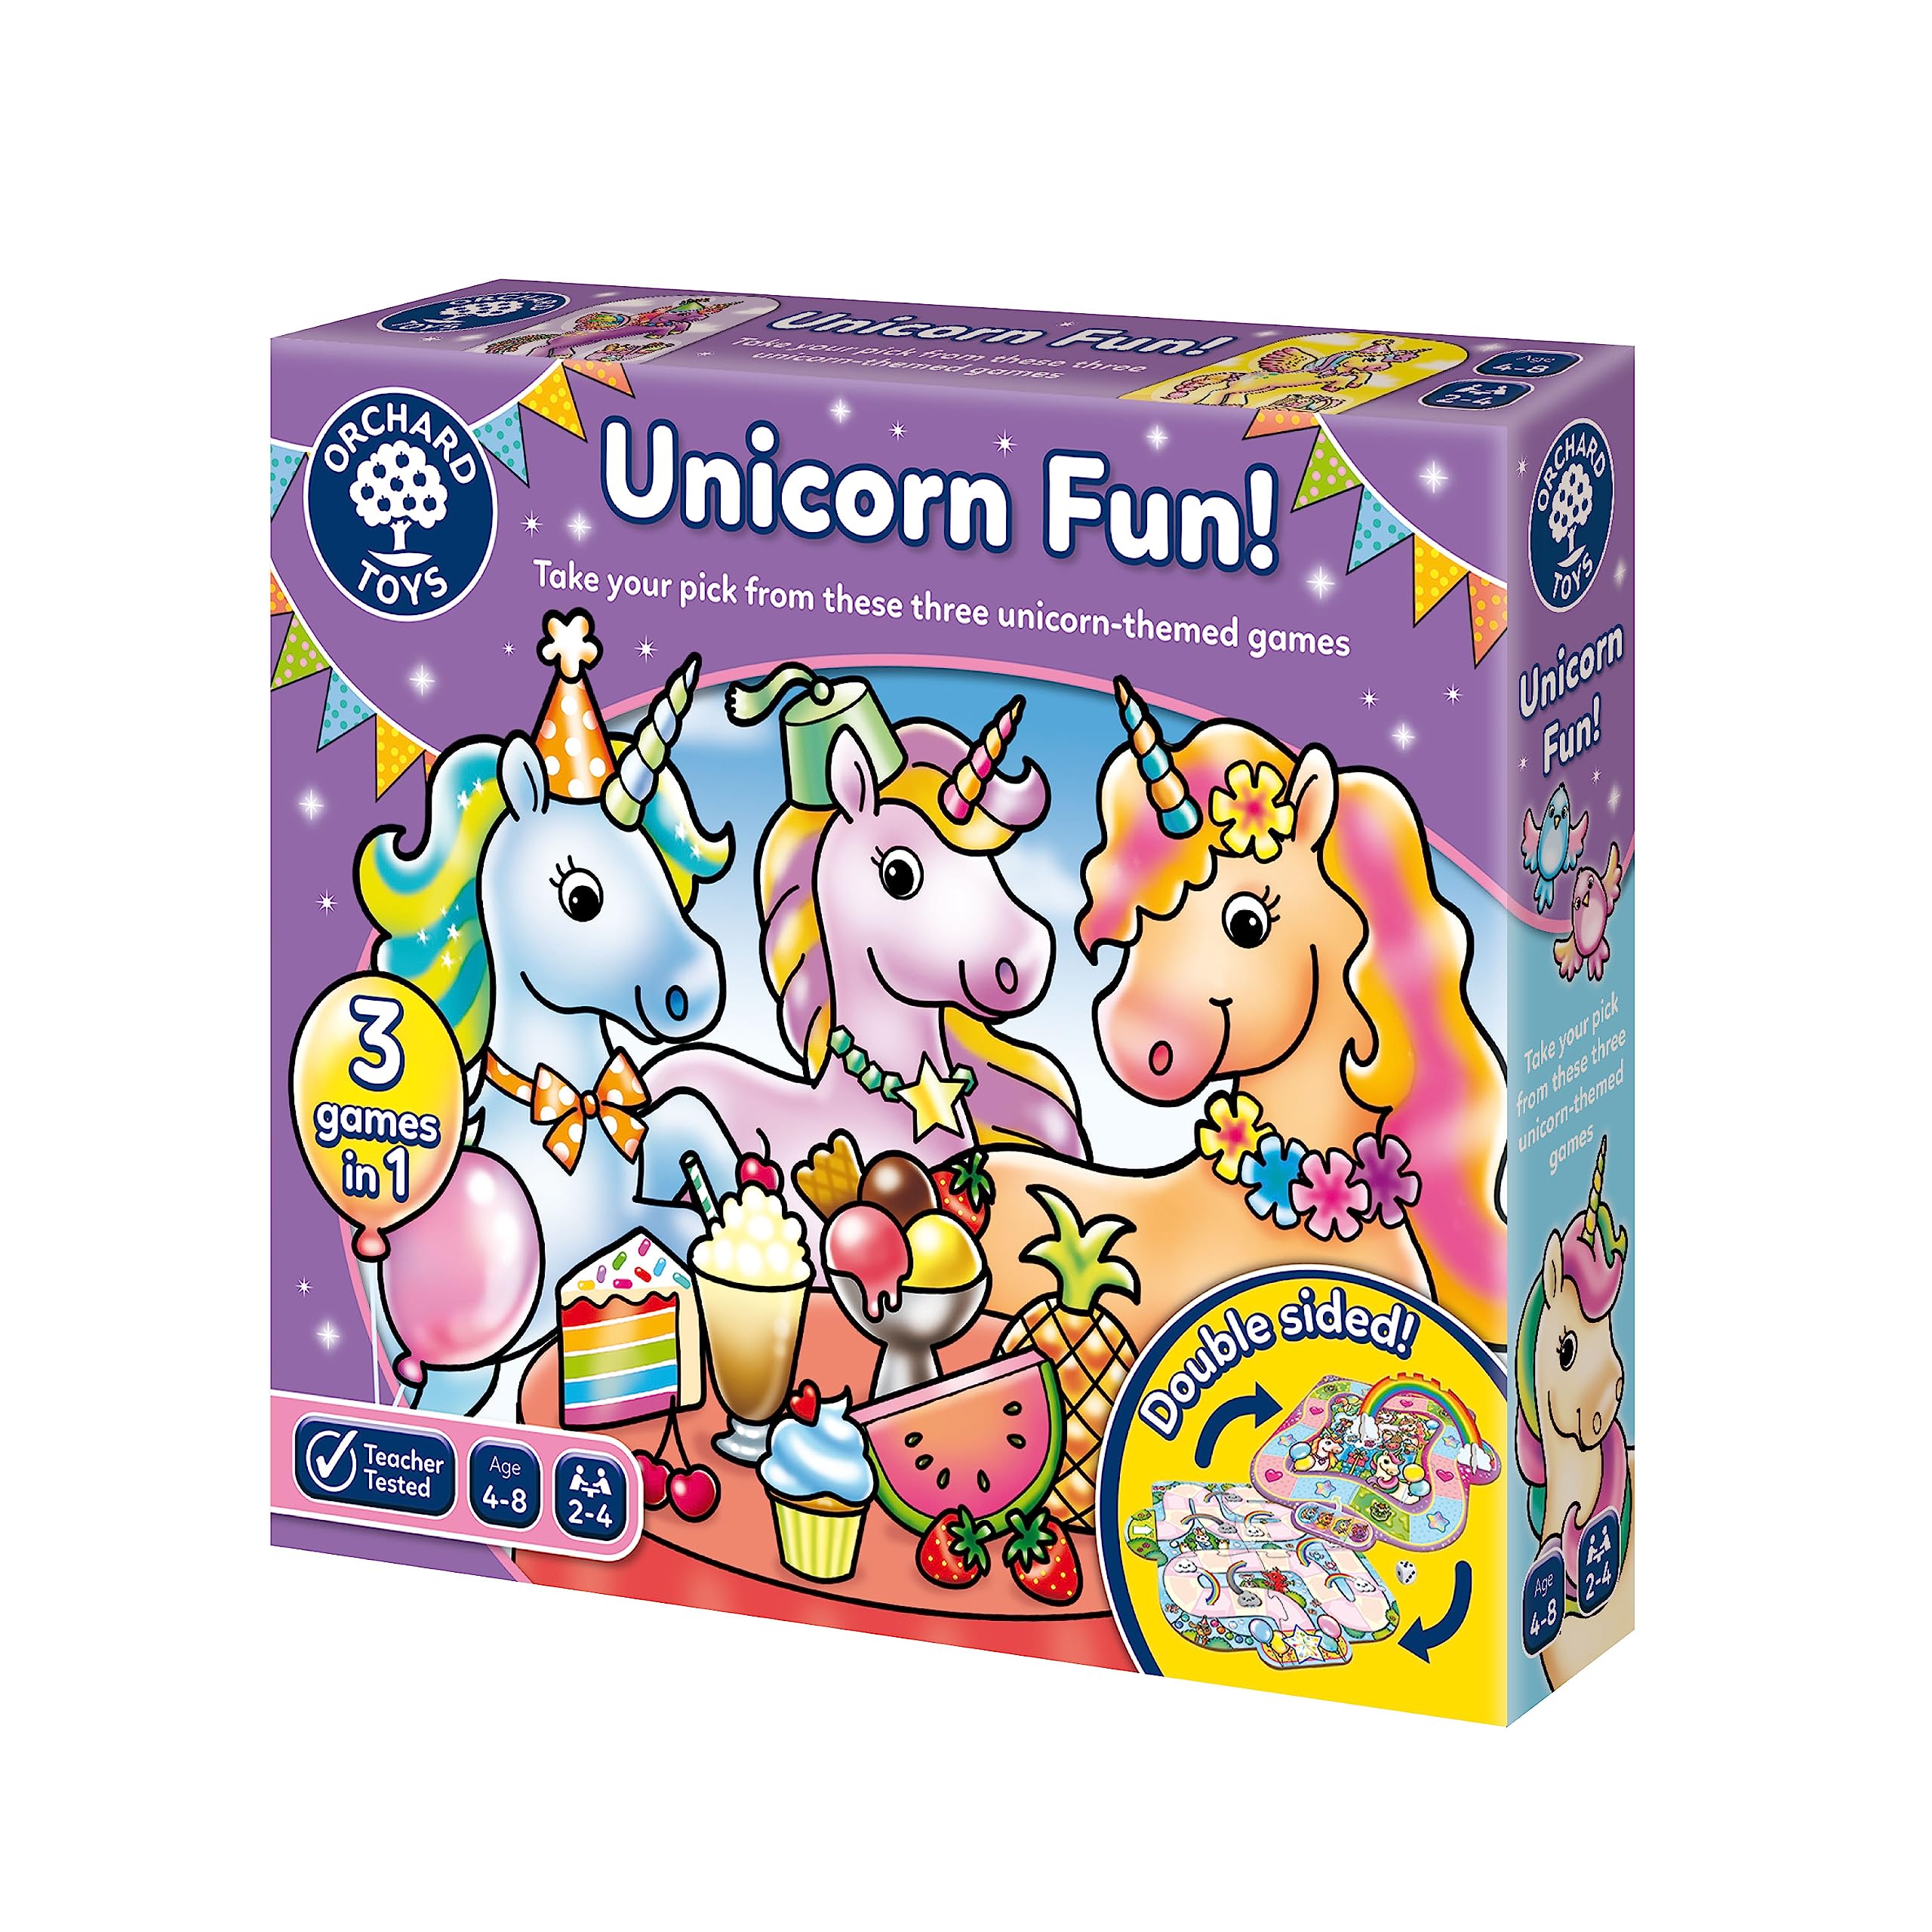 Orchard Toys Unicorn Fun Game, 3 games in 1, bumper value game, matching and memory games, for kids age 4-8, birthday gift